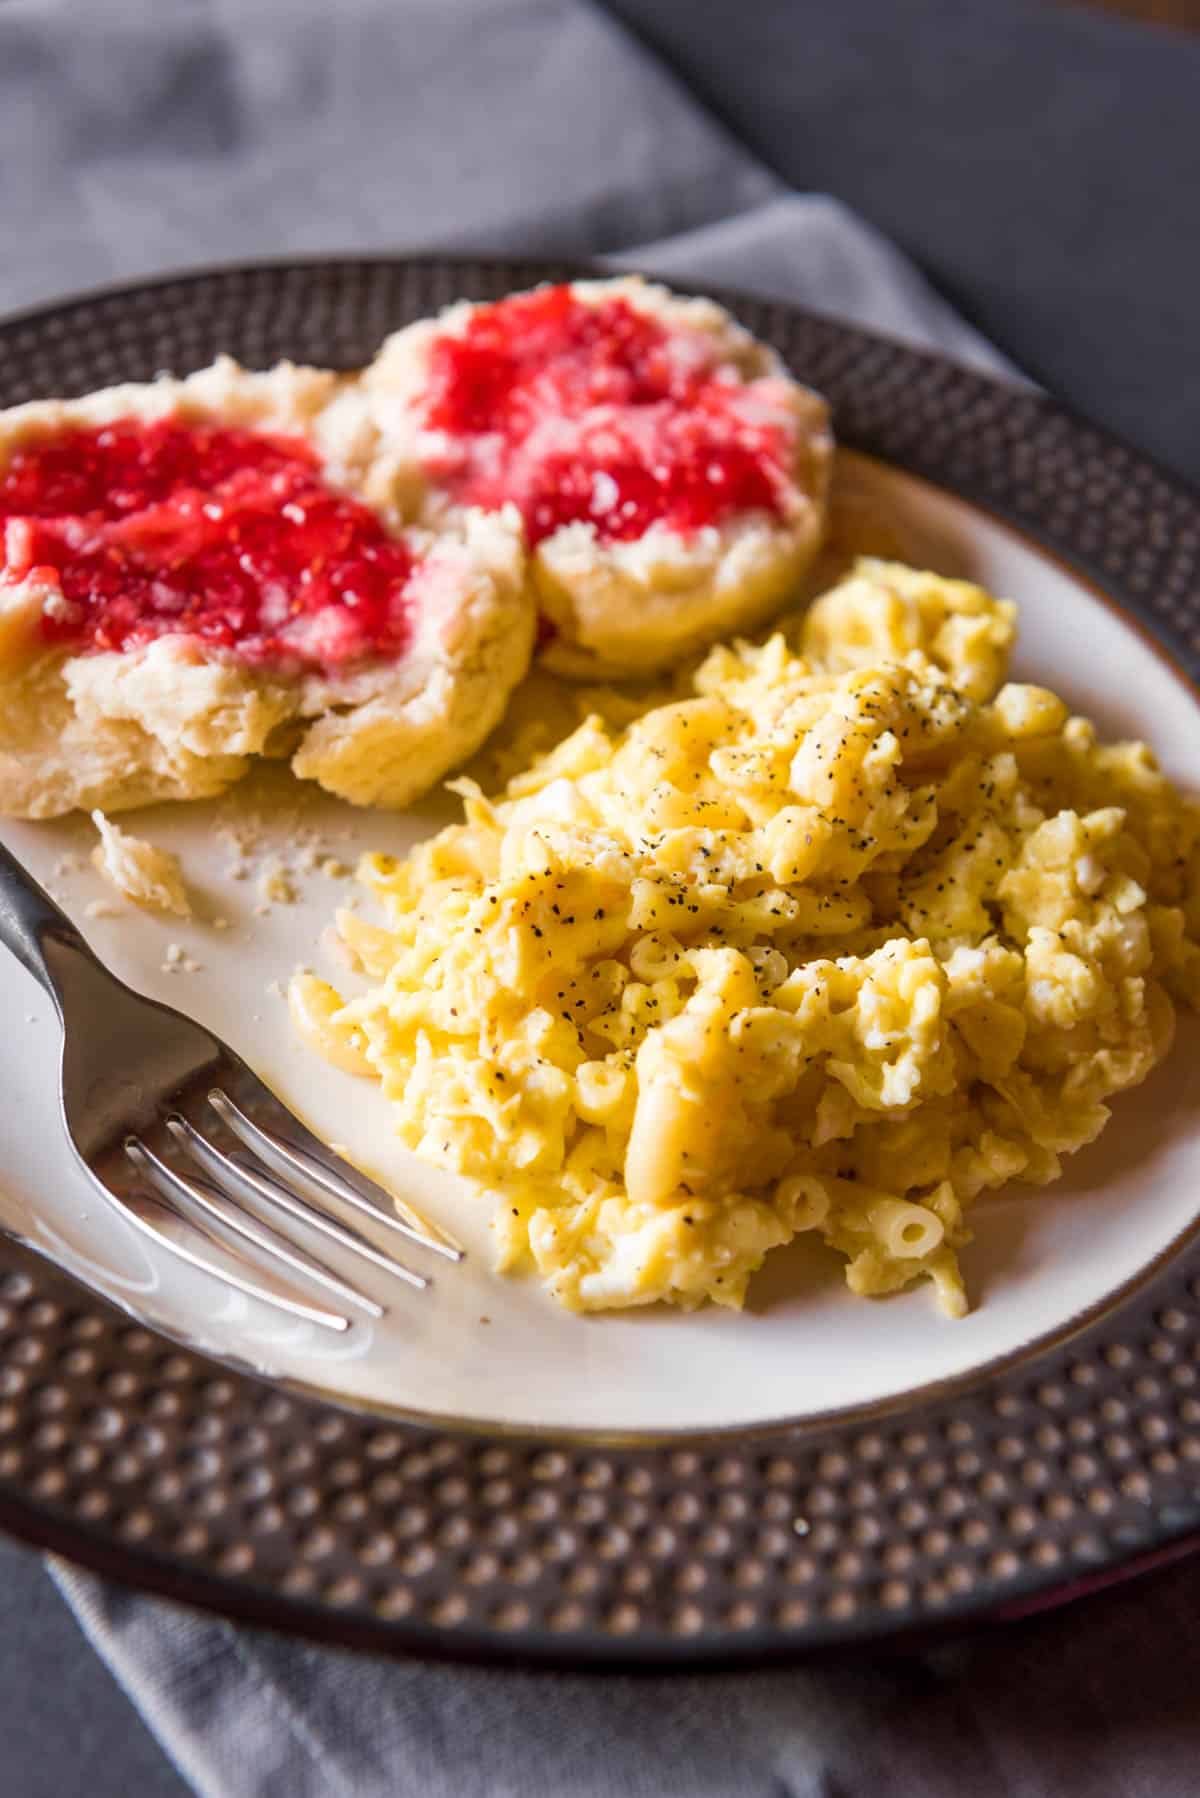 Peppery scrambled macaroni eggs on a plate with a fork and jam covered biscuit.